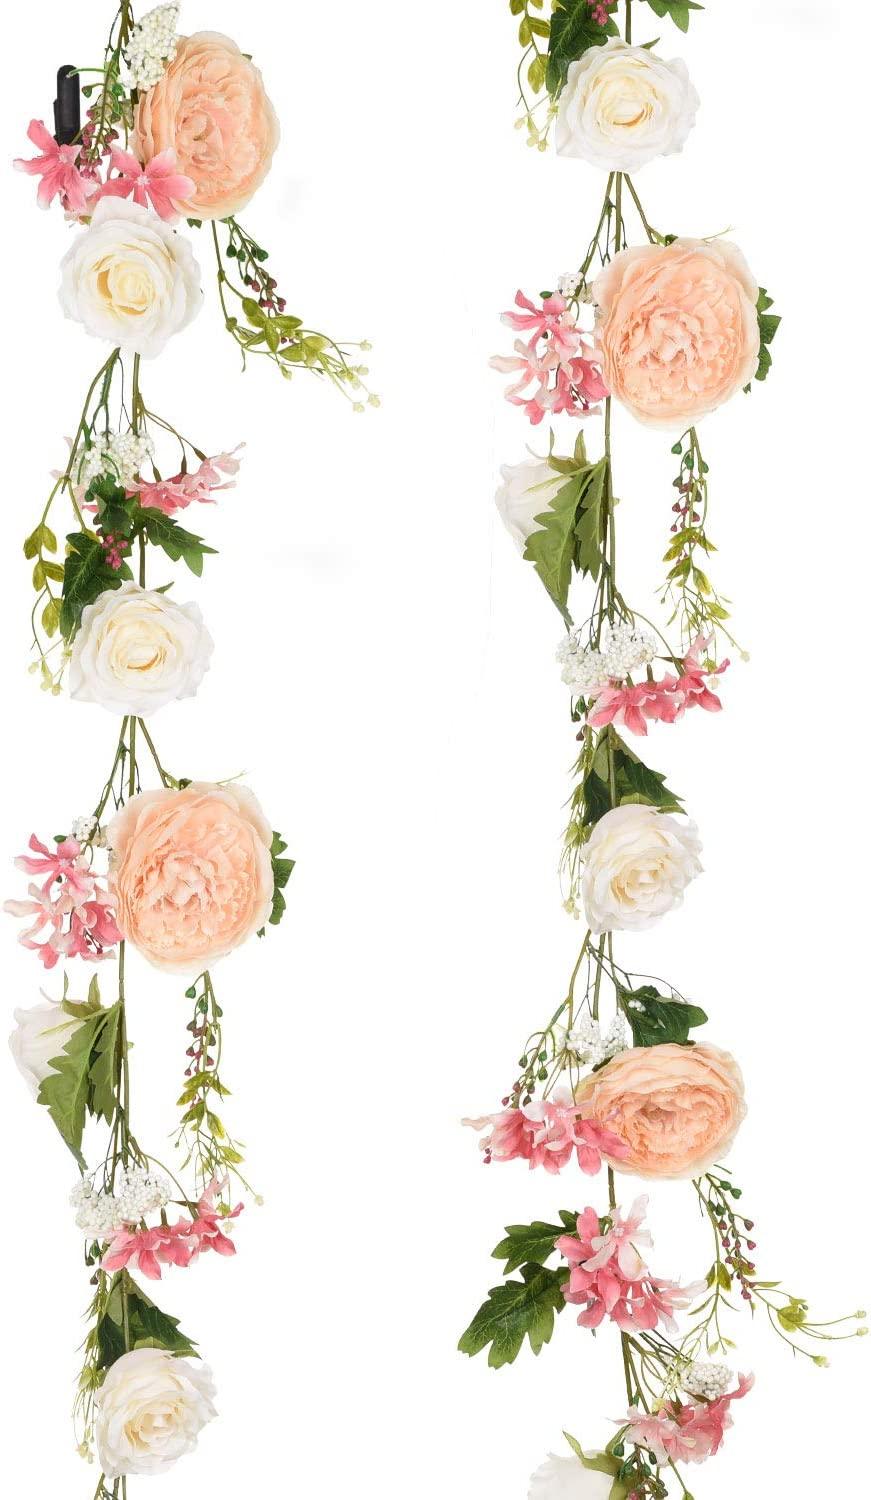 6ft Artificial Peony Garland Flowers, Floral Greenery Garland Rose Flower Vine Garland with Mixed Peony Flowers - If you say i do